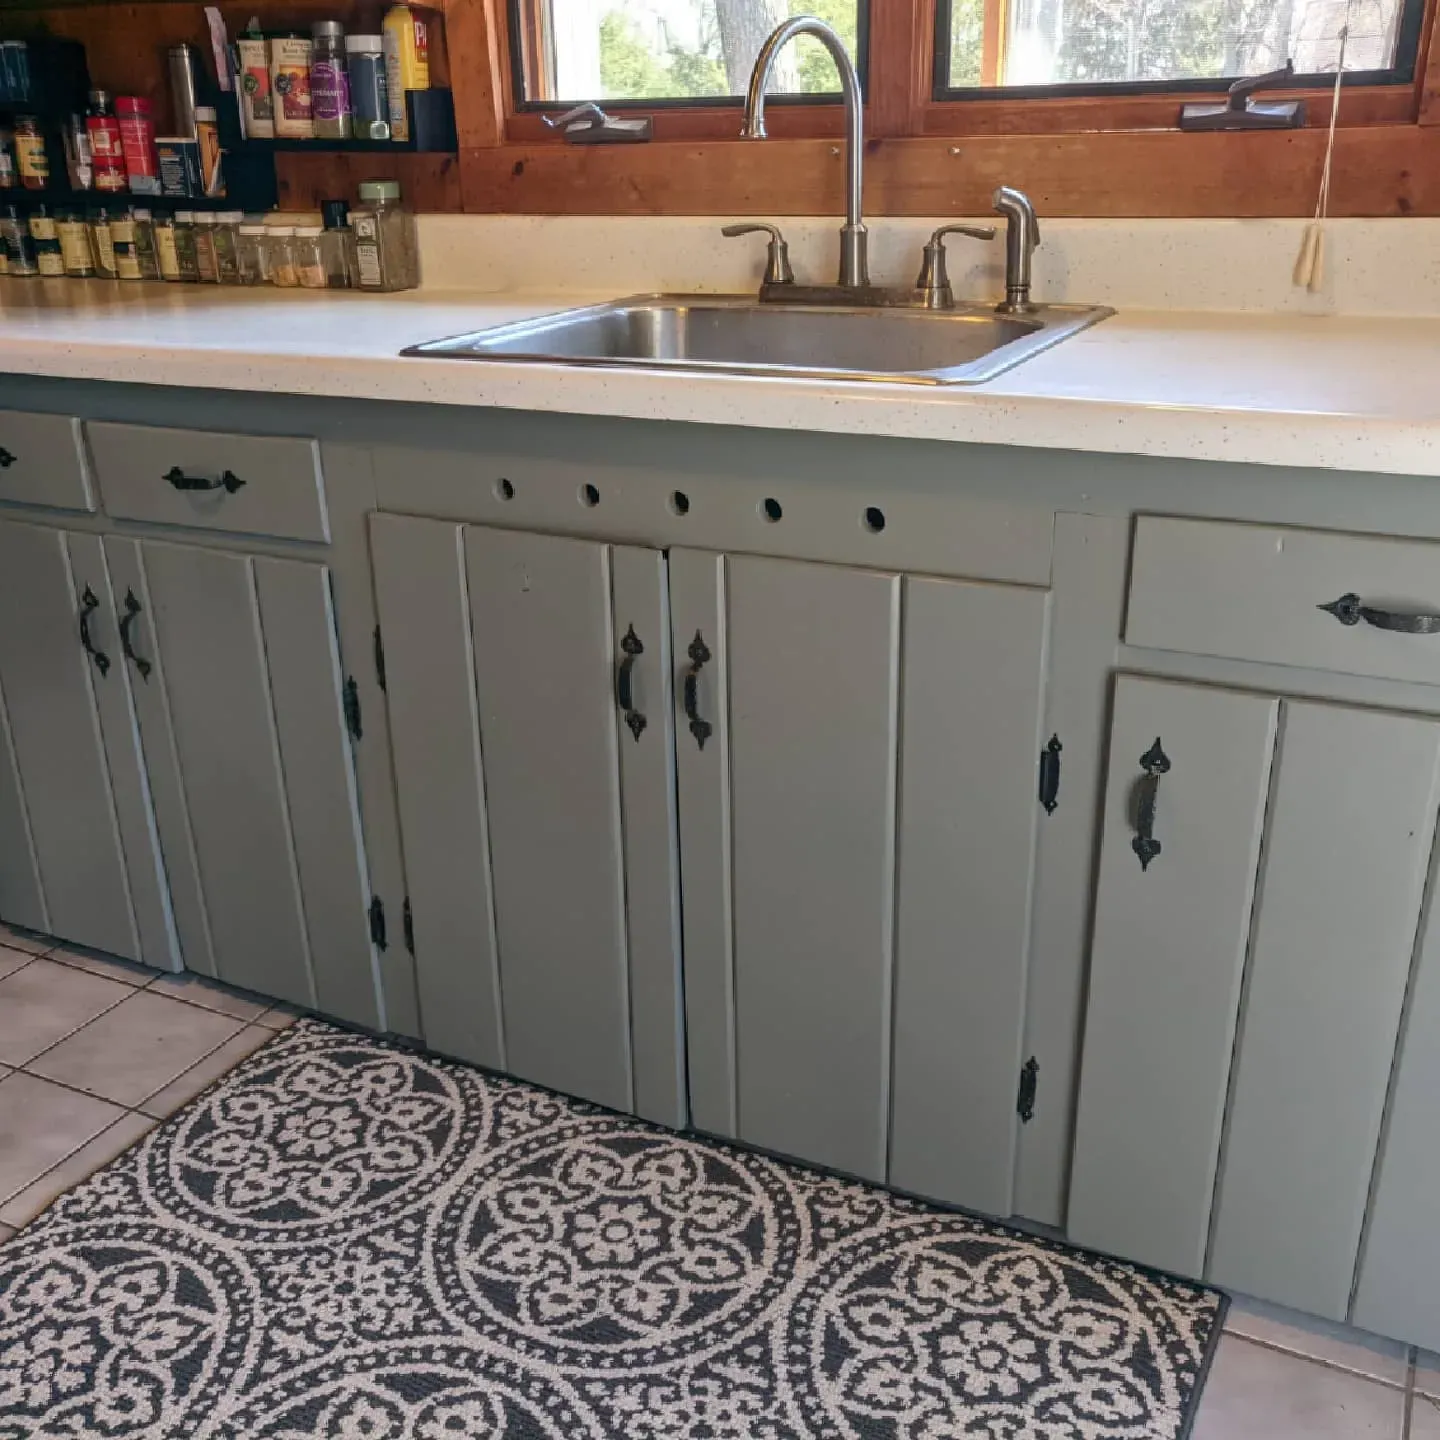 Sherwin Williams Willowleaf kitchen cabinets paint